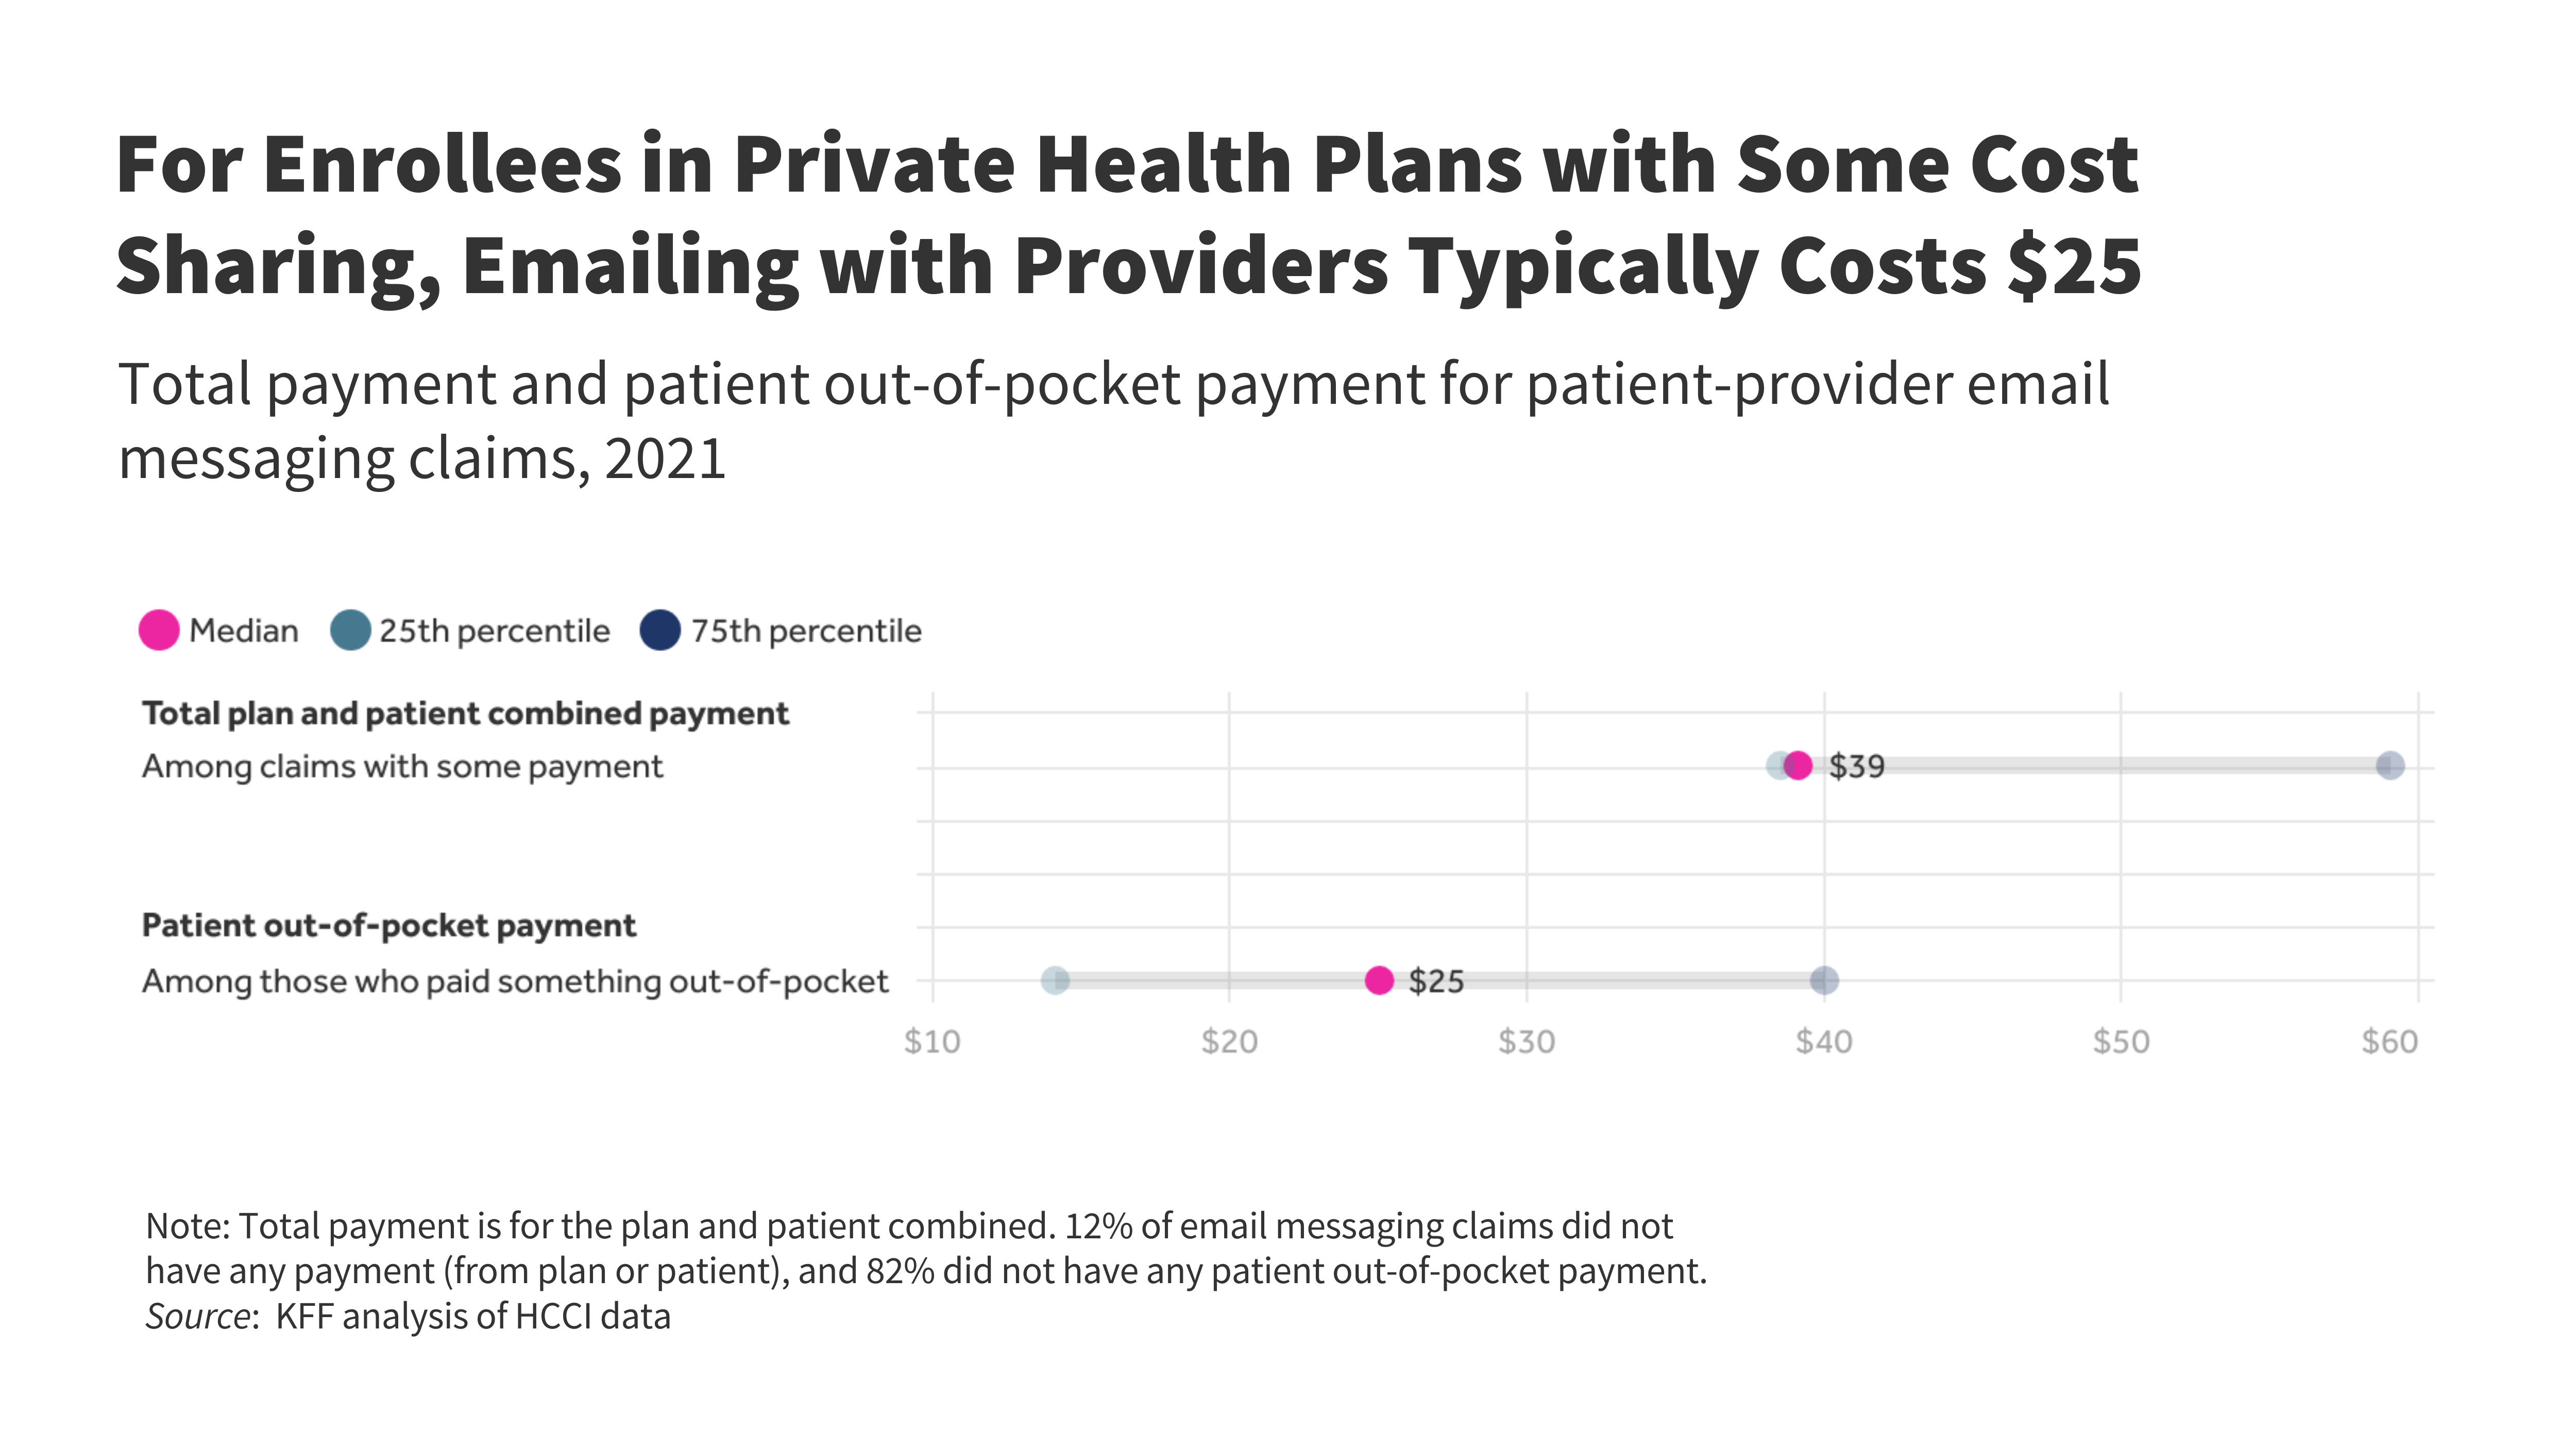 Fees for Communication with Healthcare Providers via Email